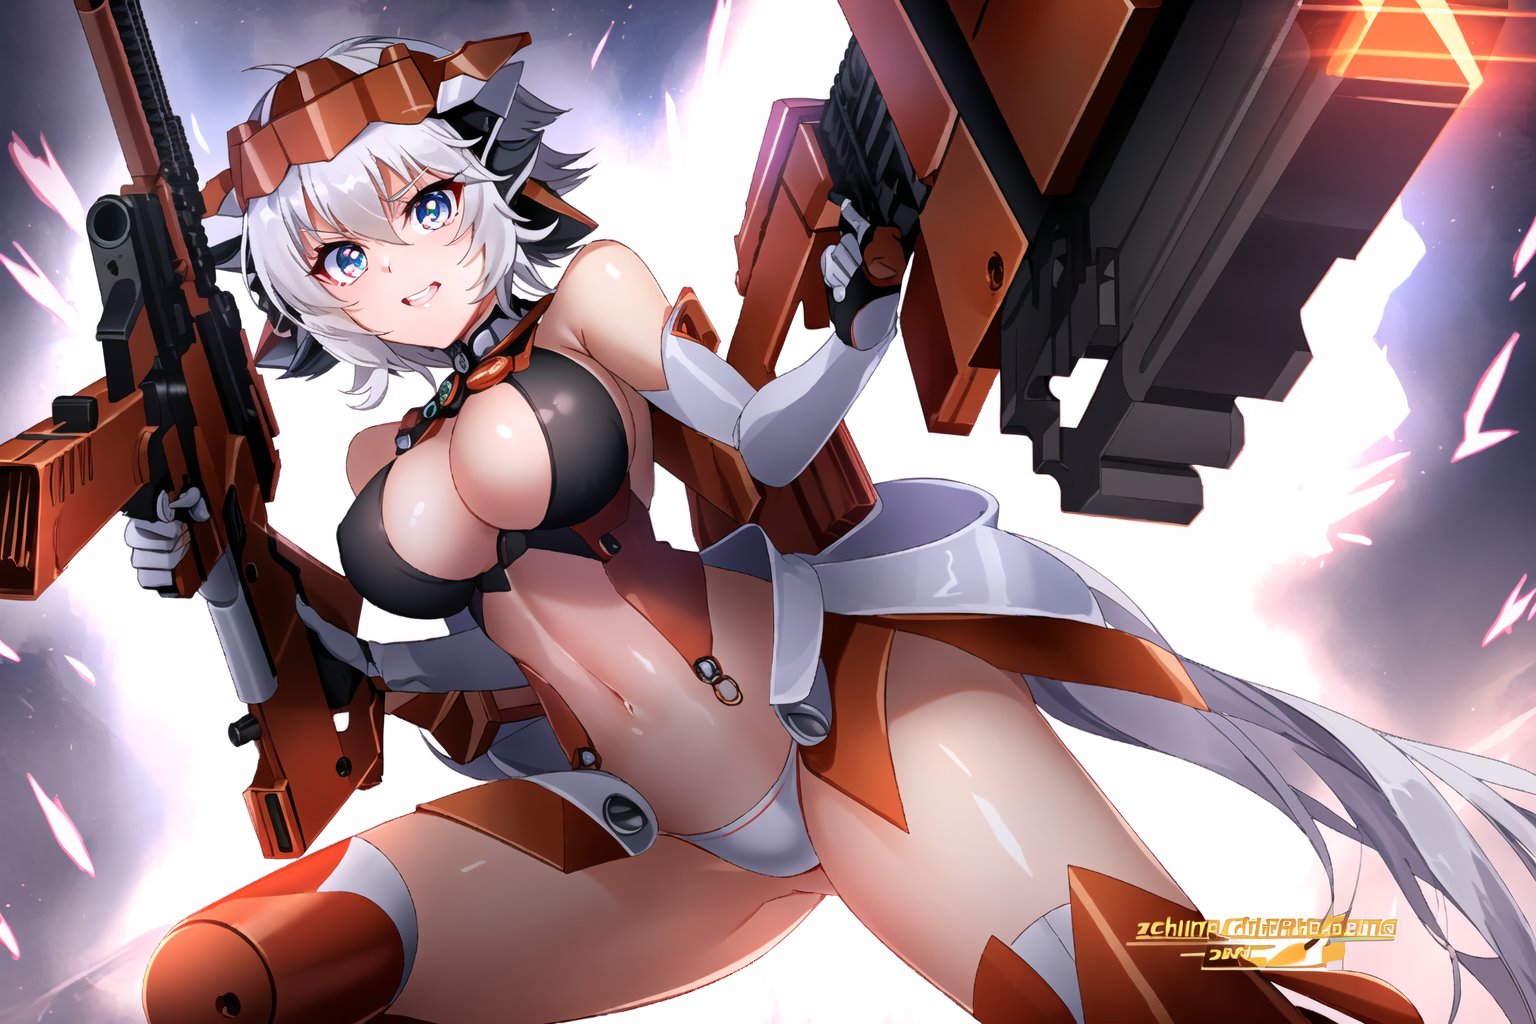 Close-up shot of YukineChris, her eyes locked intensely on the lens as she holds a futuristic-looking Gatling gun in each hand. The guns' rotating barrels spin rapidly, casting a metallic whirring sound against the darkened background. Her pose exudes confidence and authority, with one gun pointing directly at the camera while the other is cocked and ready to fire.